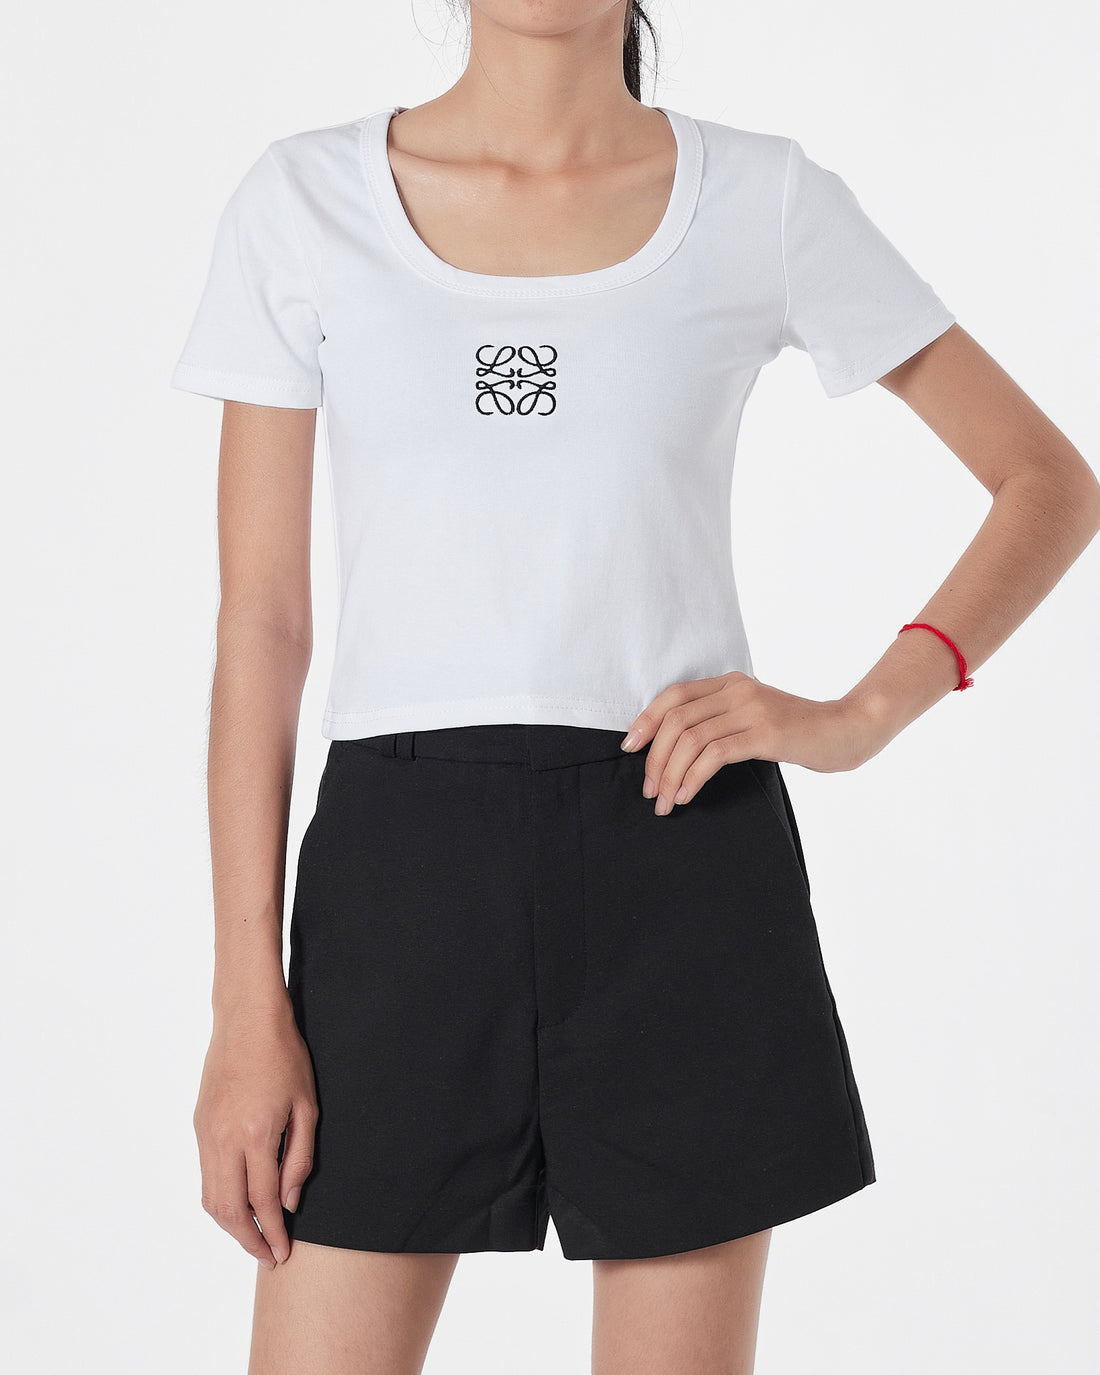 LOW Logo Embroidered Lady White T-Shirt Crop Top 10.90